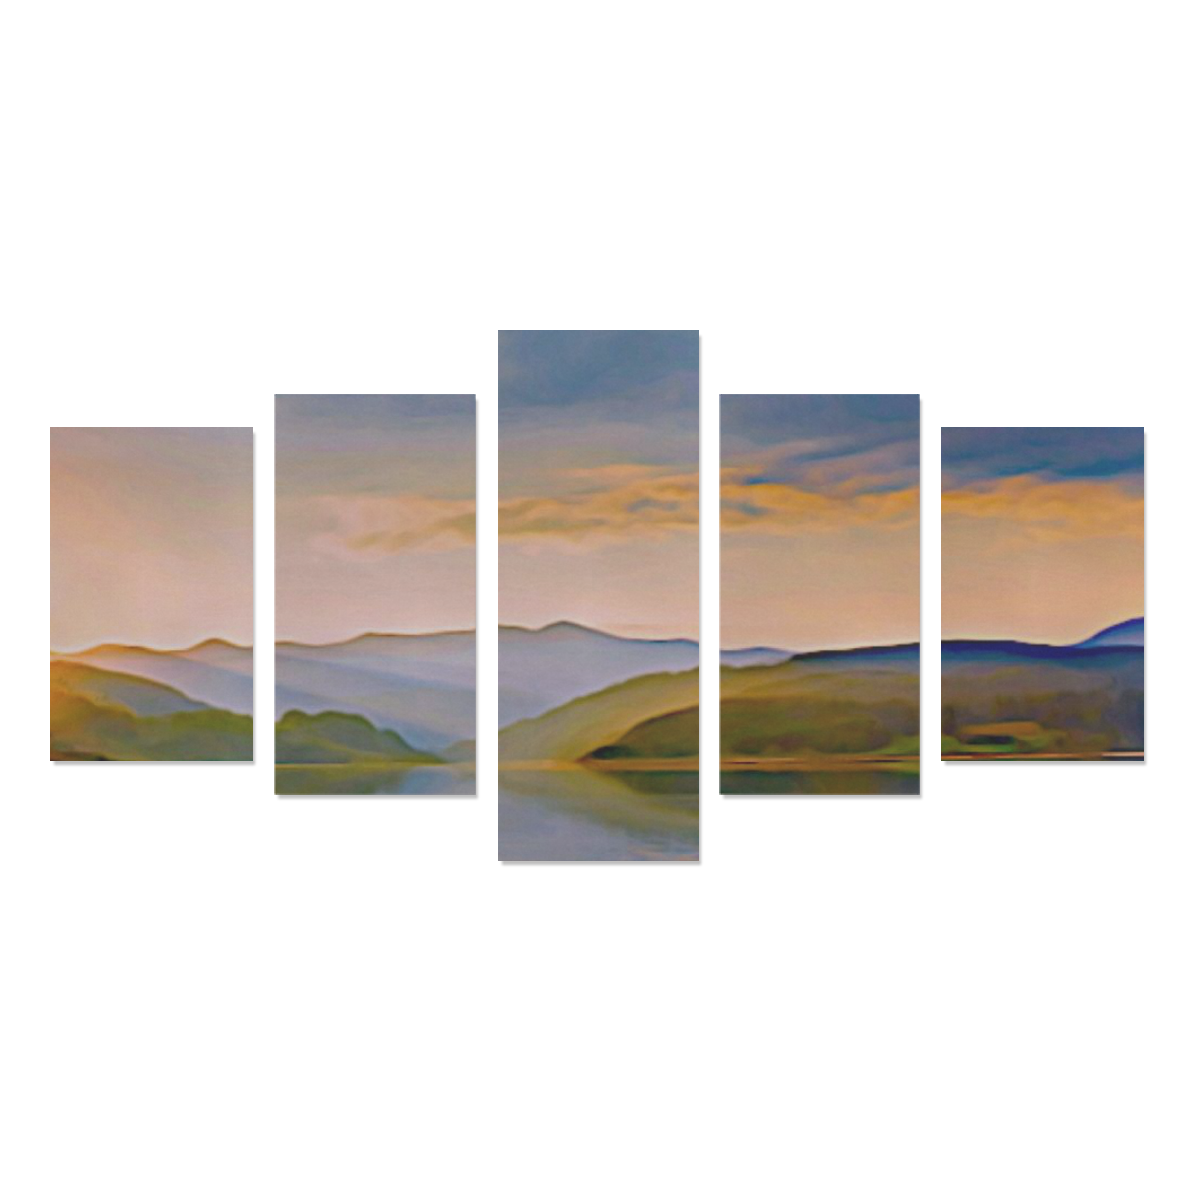 Travel to sunset 01 by JamColors Canvas Print Sets C (No Frame)